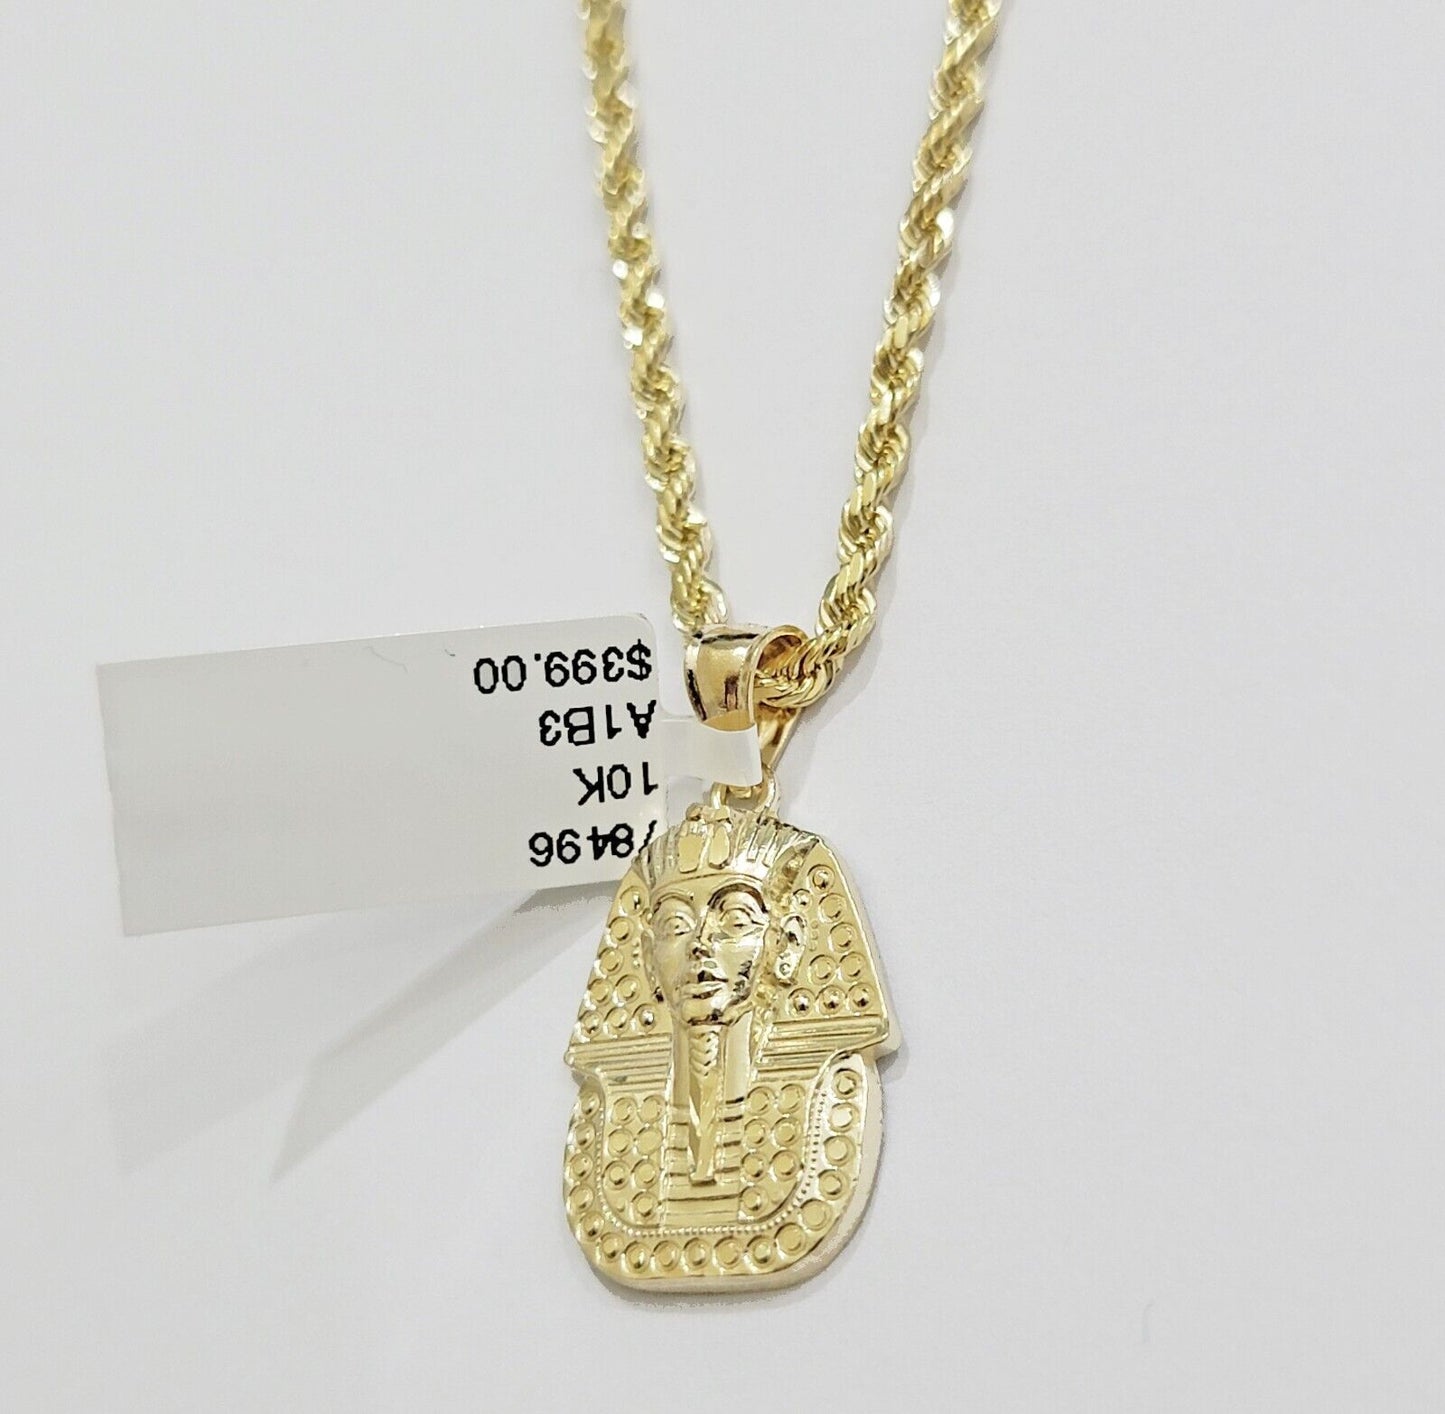 Real 10k Yellow Gold Rope Chain & Pharoah Head Pendant 2.5mm 18-26 inch Necklace